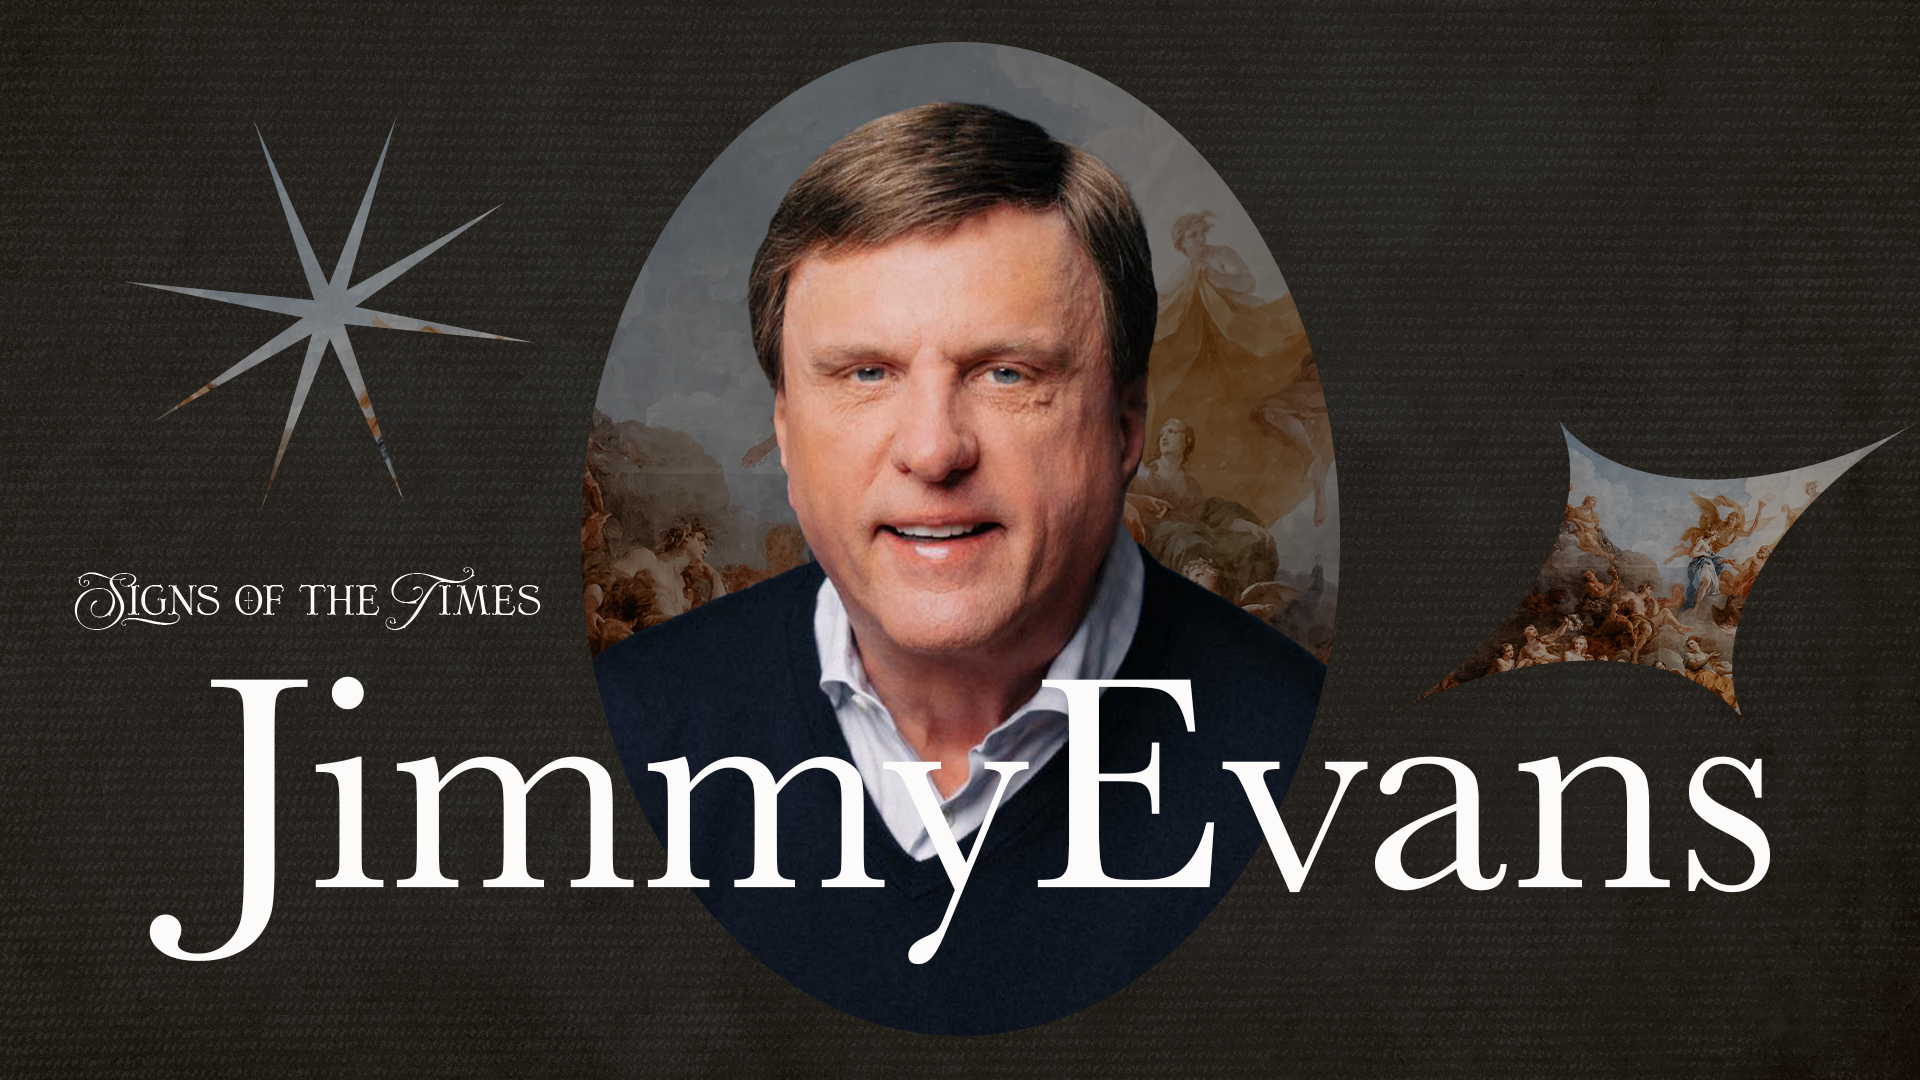 Signs of the Times: Jimmy Evans at the Cumming campus